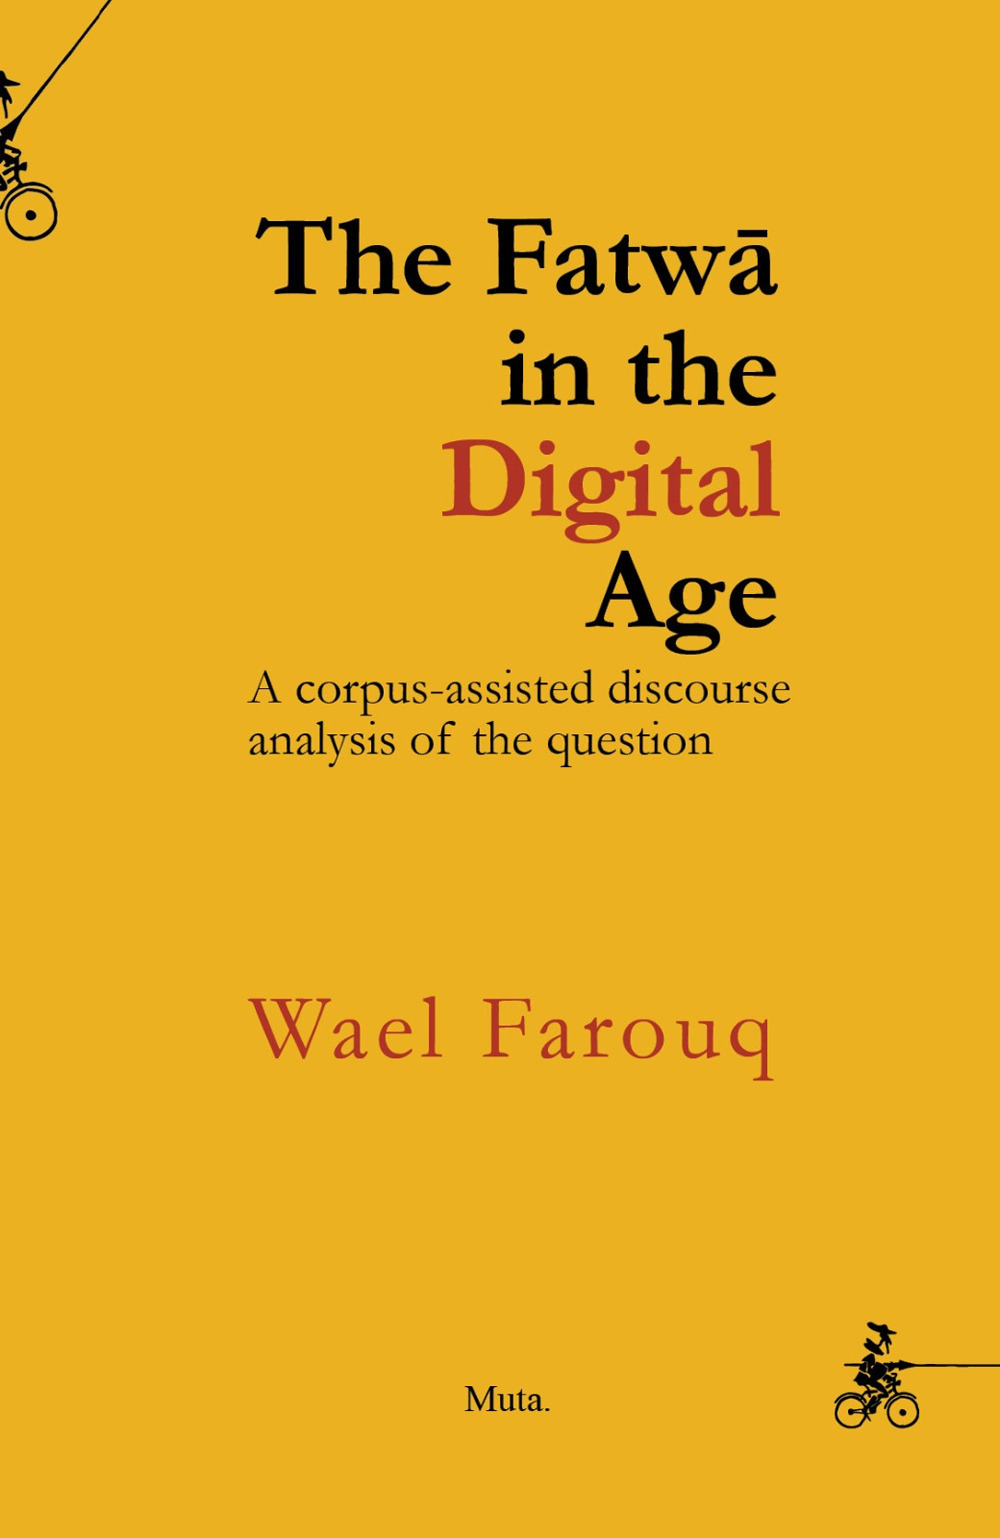 The Fatwâ in the digital Aage. A corpus-assisted discourse analysis of the question. Nuova ediz.